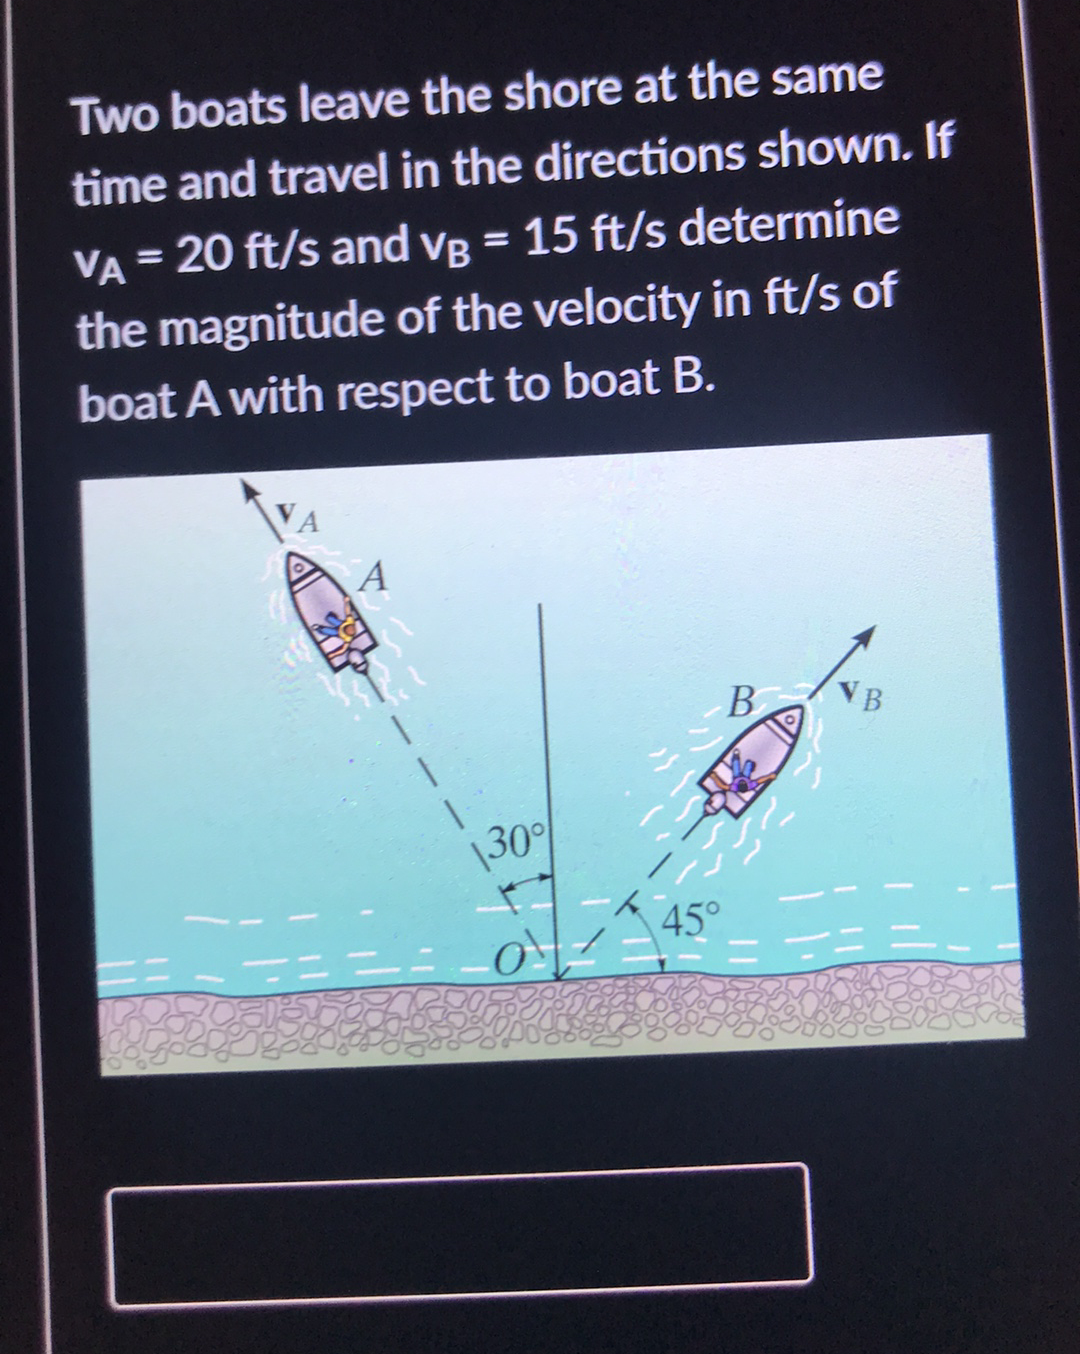 Two boats leave the shore at the same
time and travel in the directions shown. If
VA = 20 ft/s and vB = 15 ft/s determine
the magnitude of the velocity in ft/s of
boat A with respect to boat B.
В
VB
|30
45°
